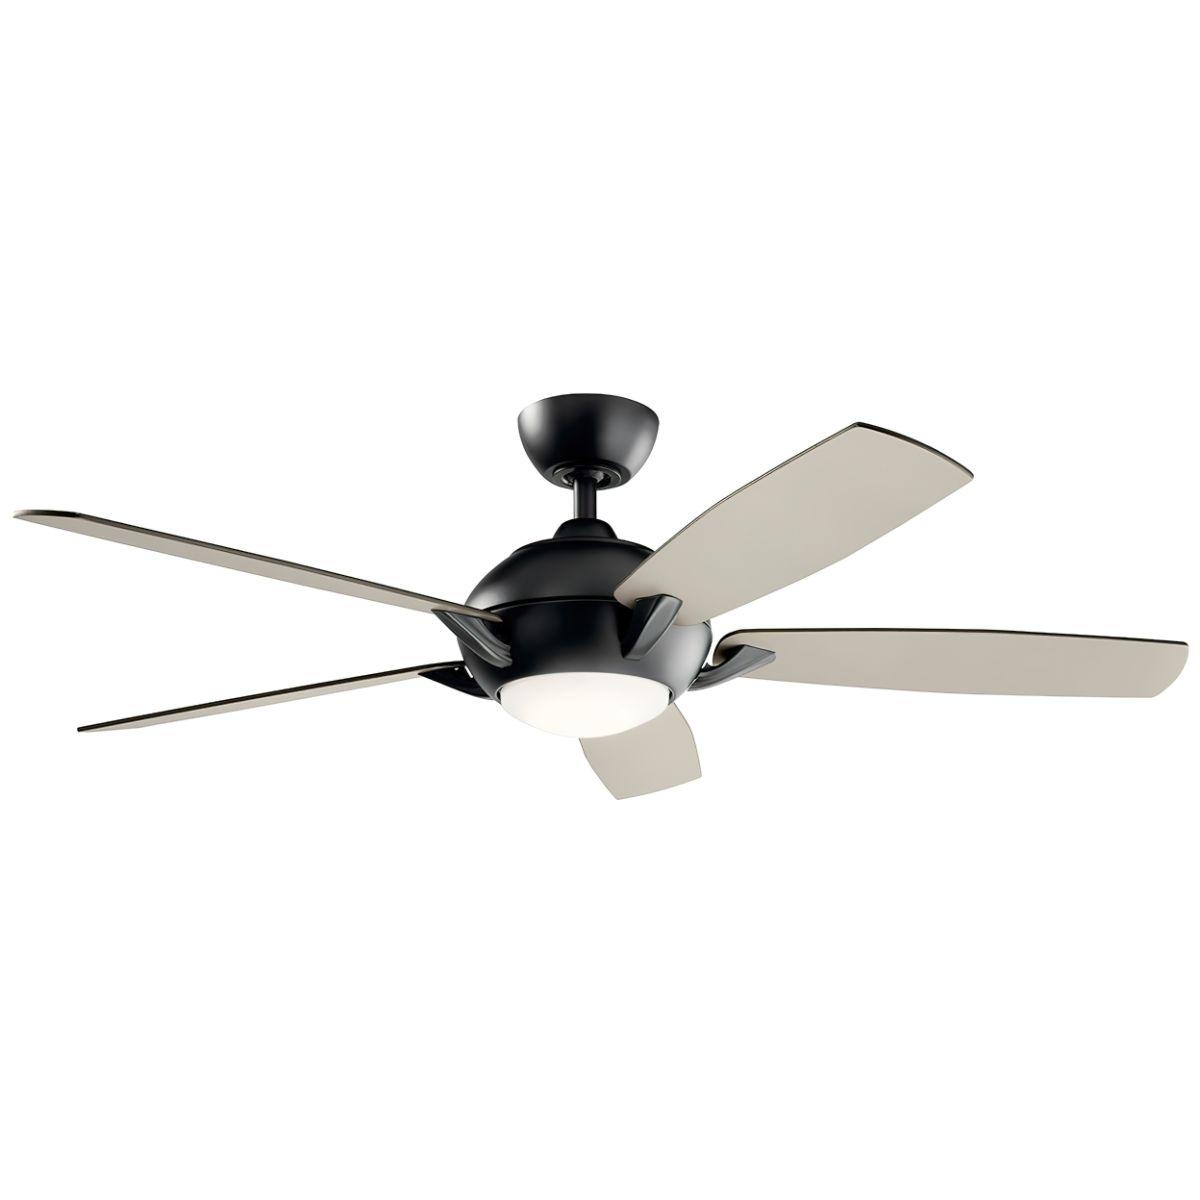 Geno 54 Inch Traditional Ceiling Fan With Light And Remote